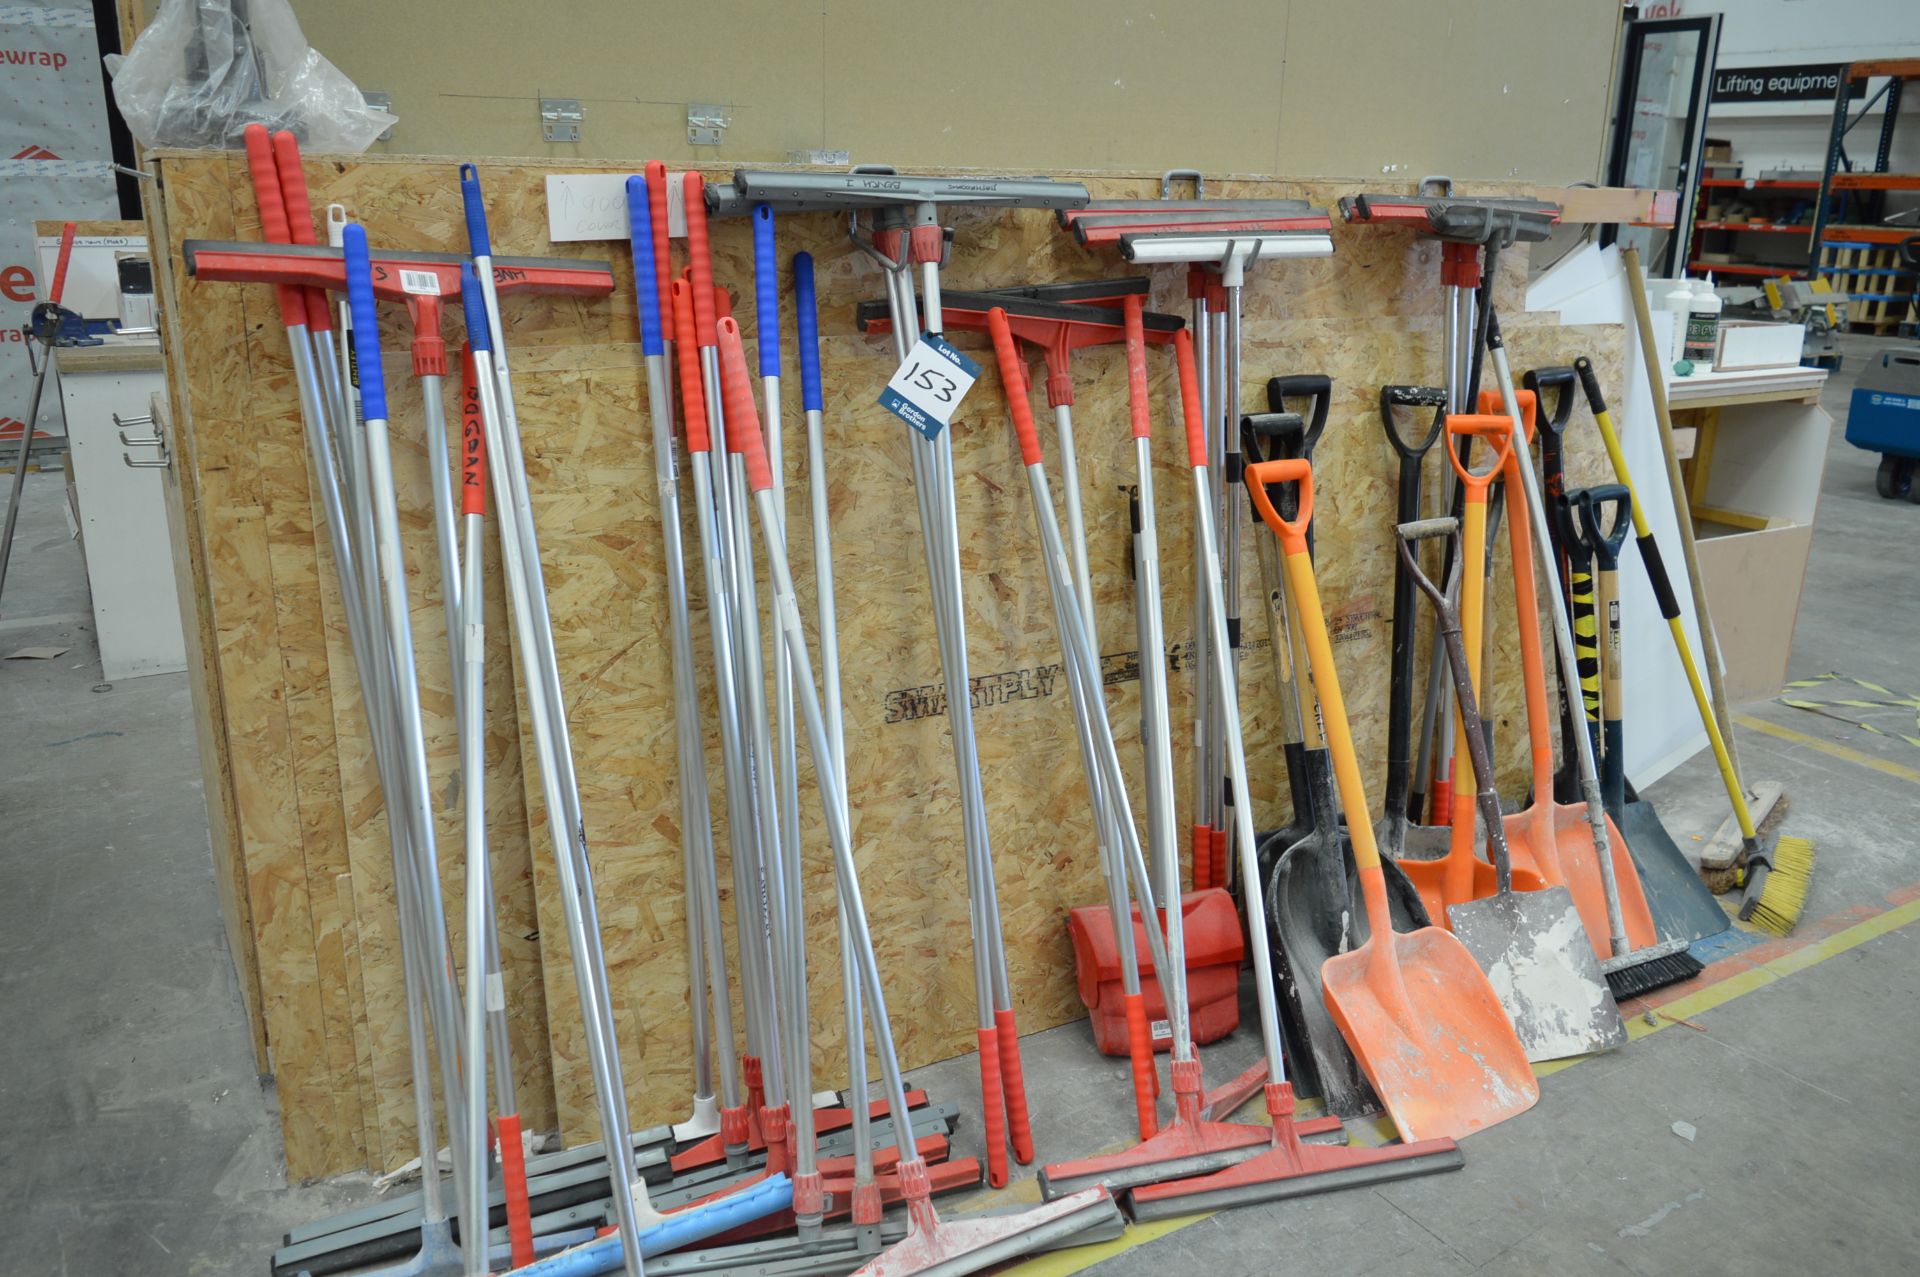 Quantity of brushes, spades and squeegees